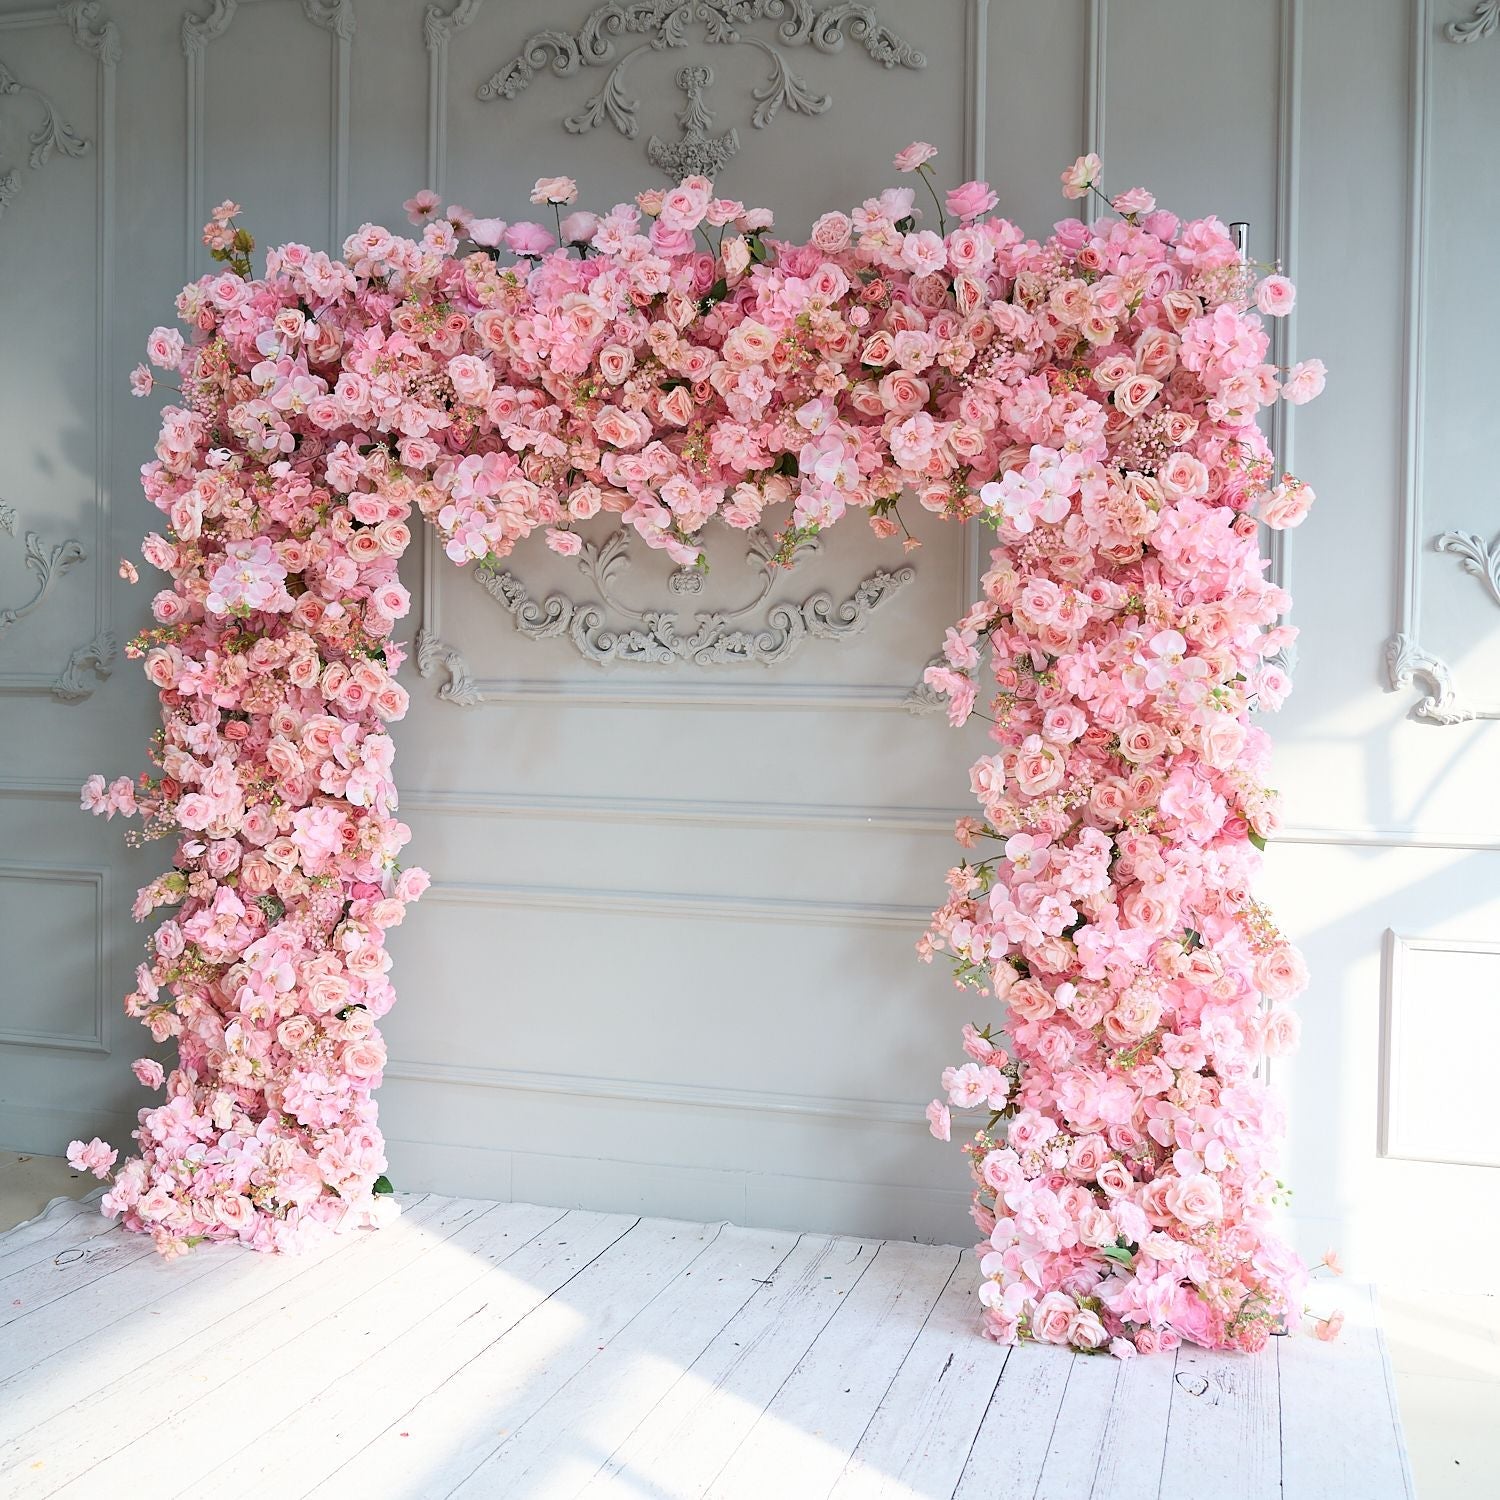 The pink roses flower wall looks cute and romantic.